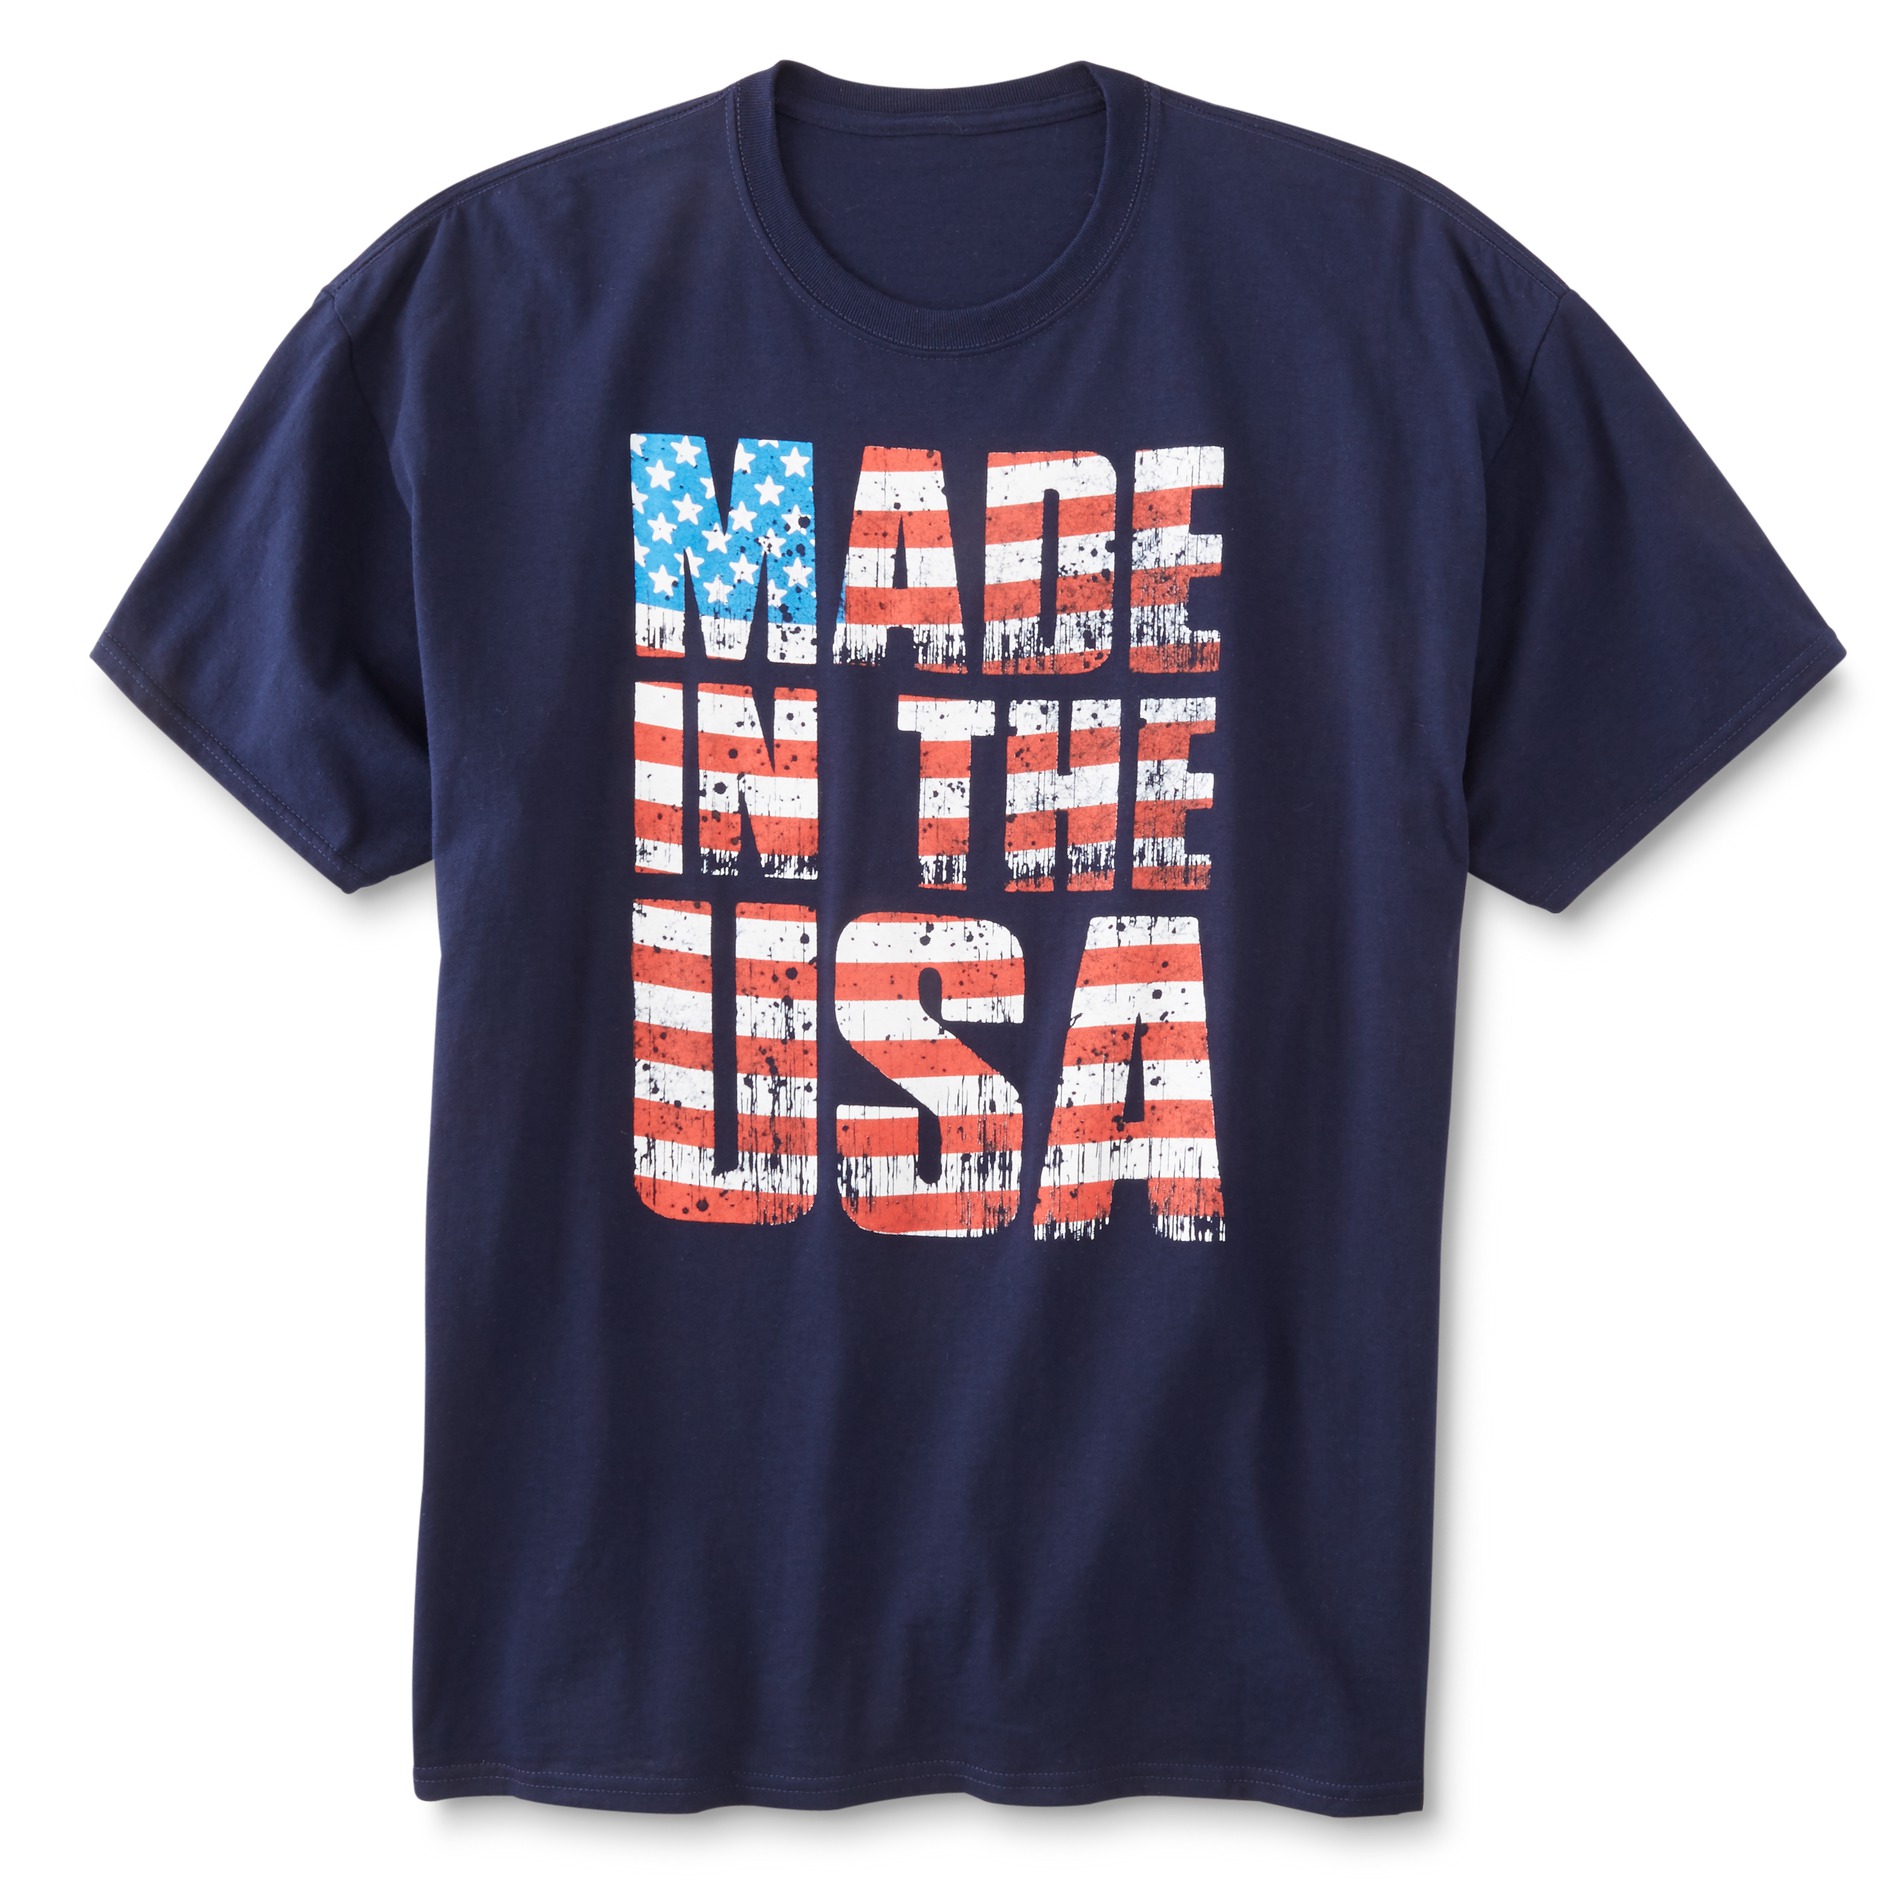 Men's Big & Tall Graphic T-Shirt - Made In The USA